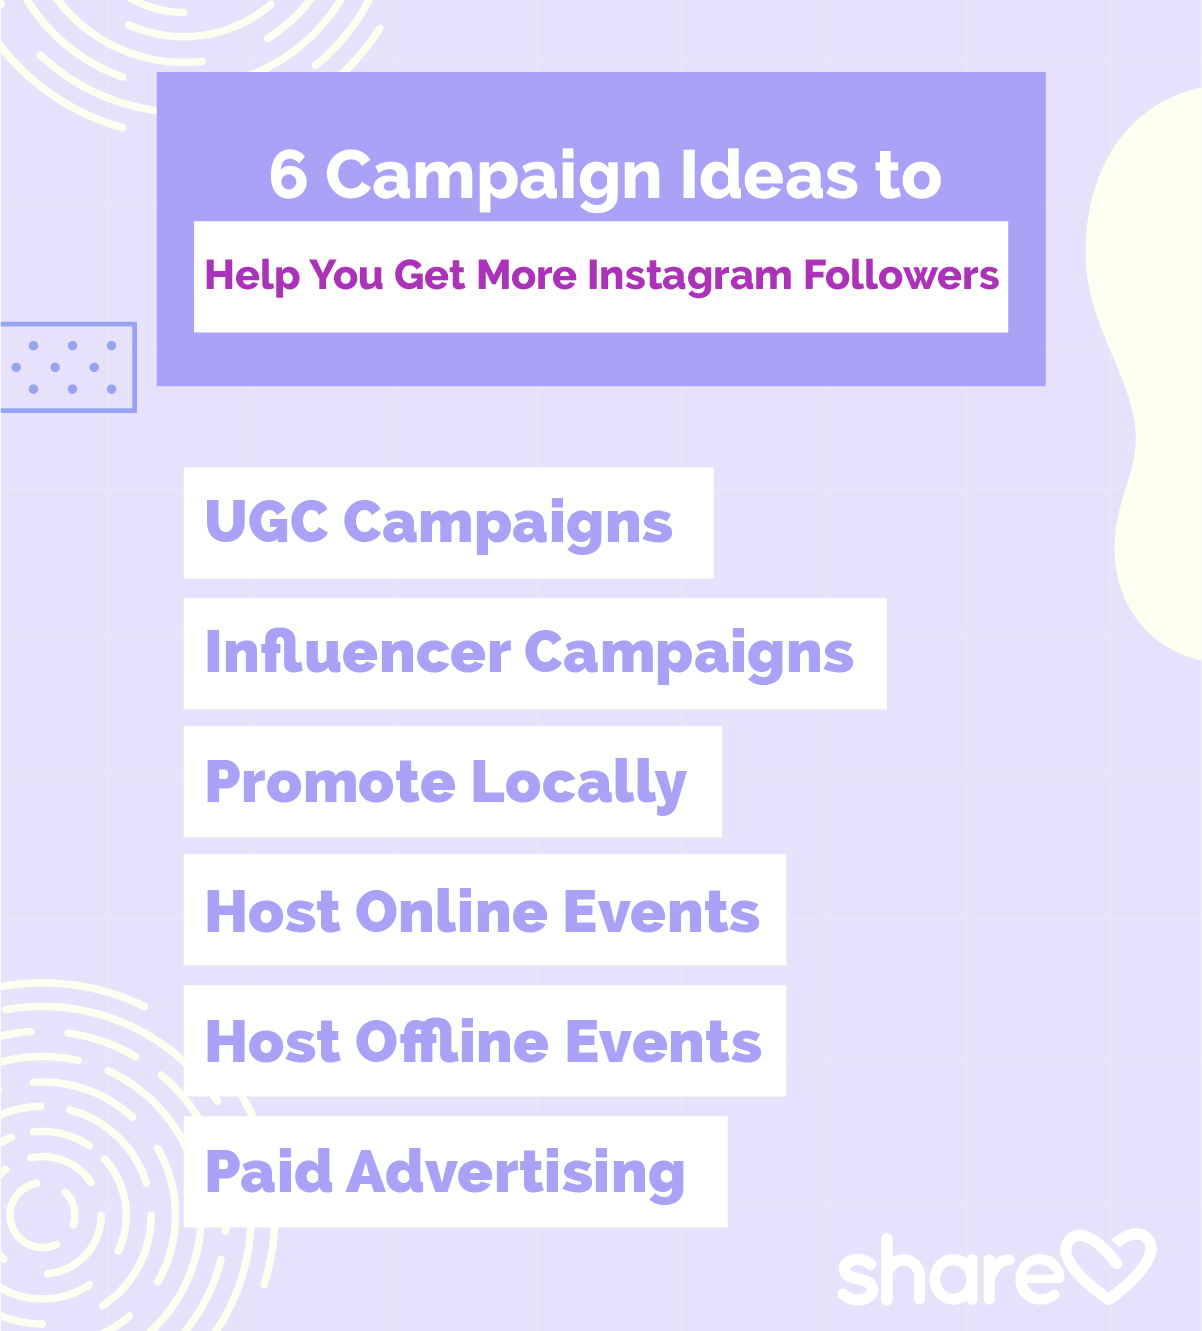 6 Campaign Ideas To Help You Get More Instagram Followers